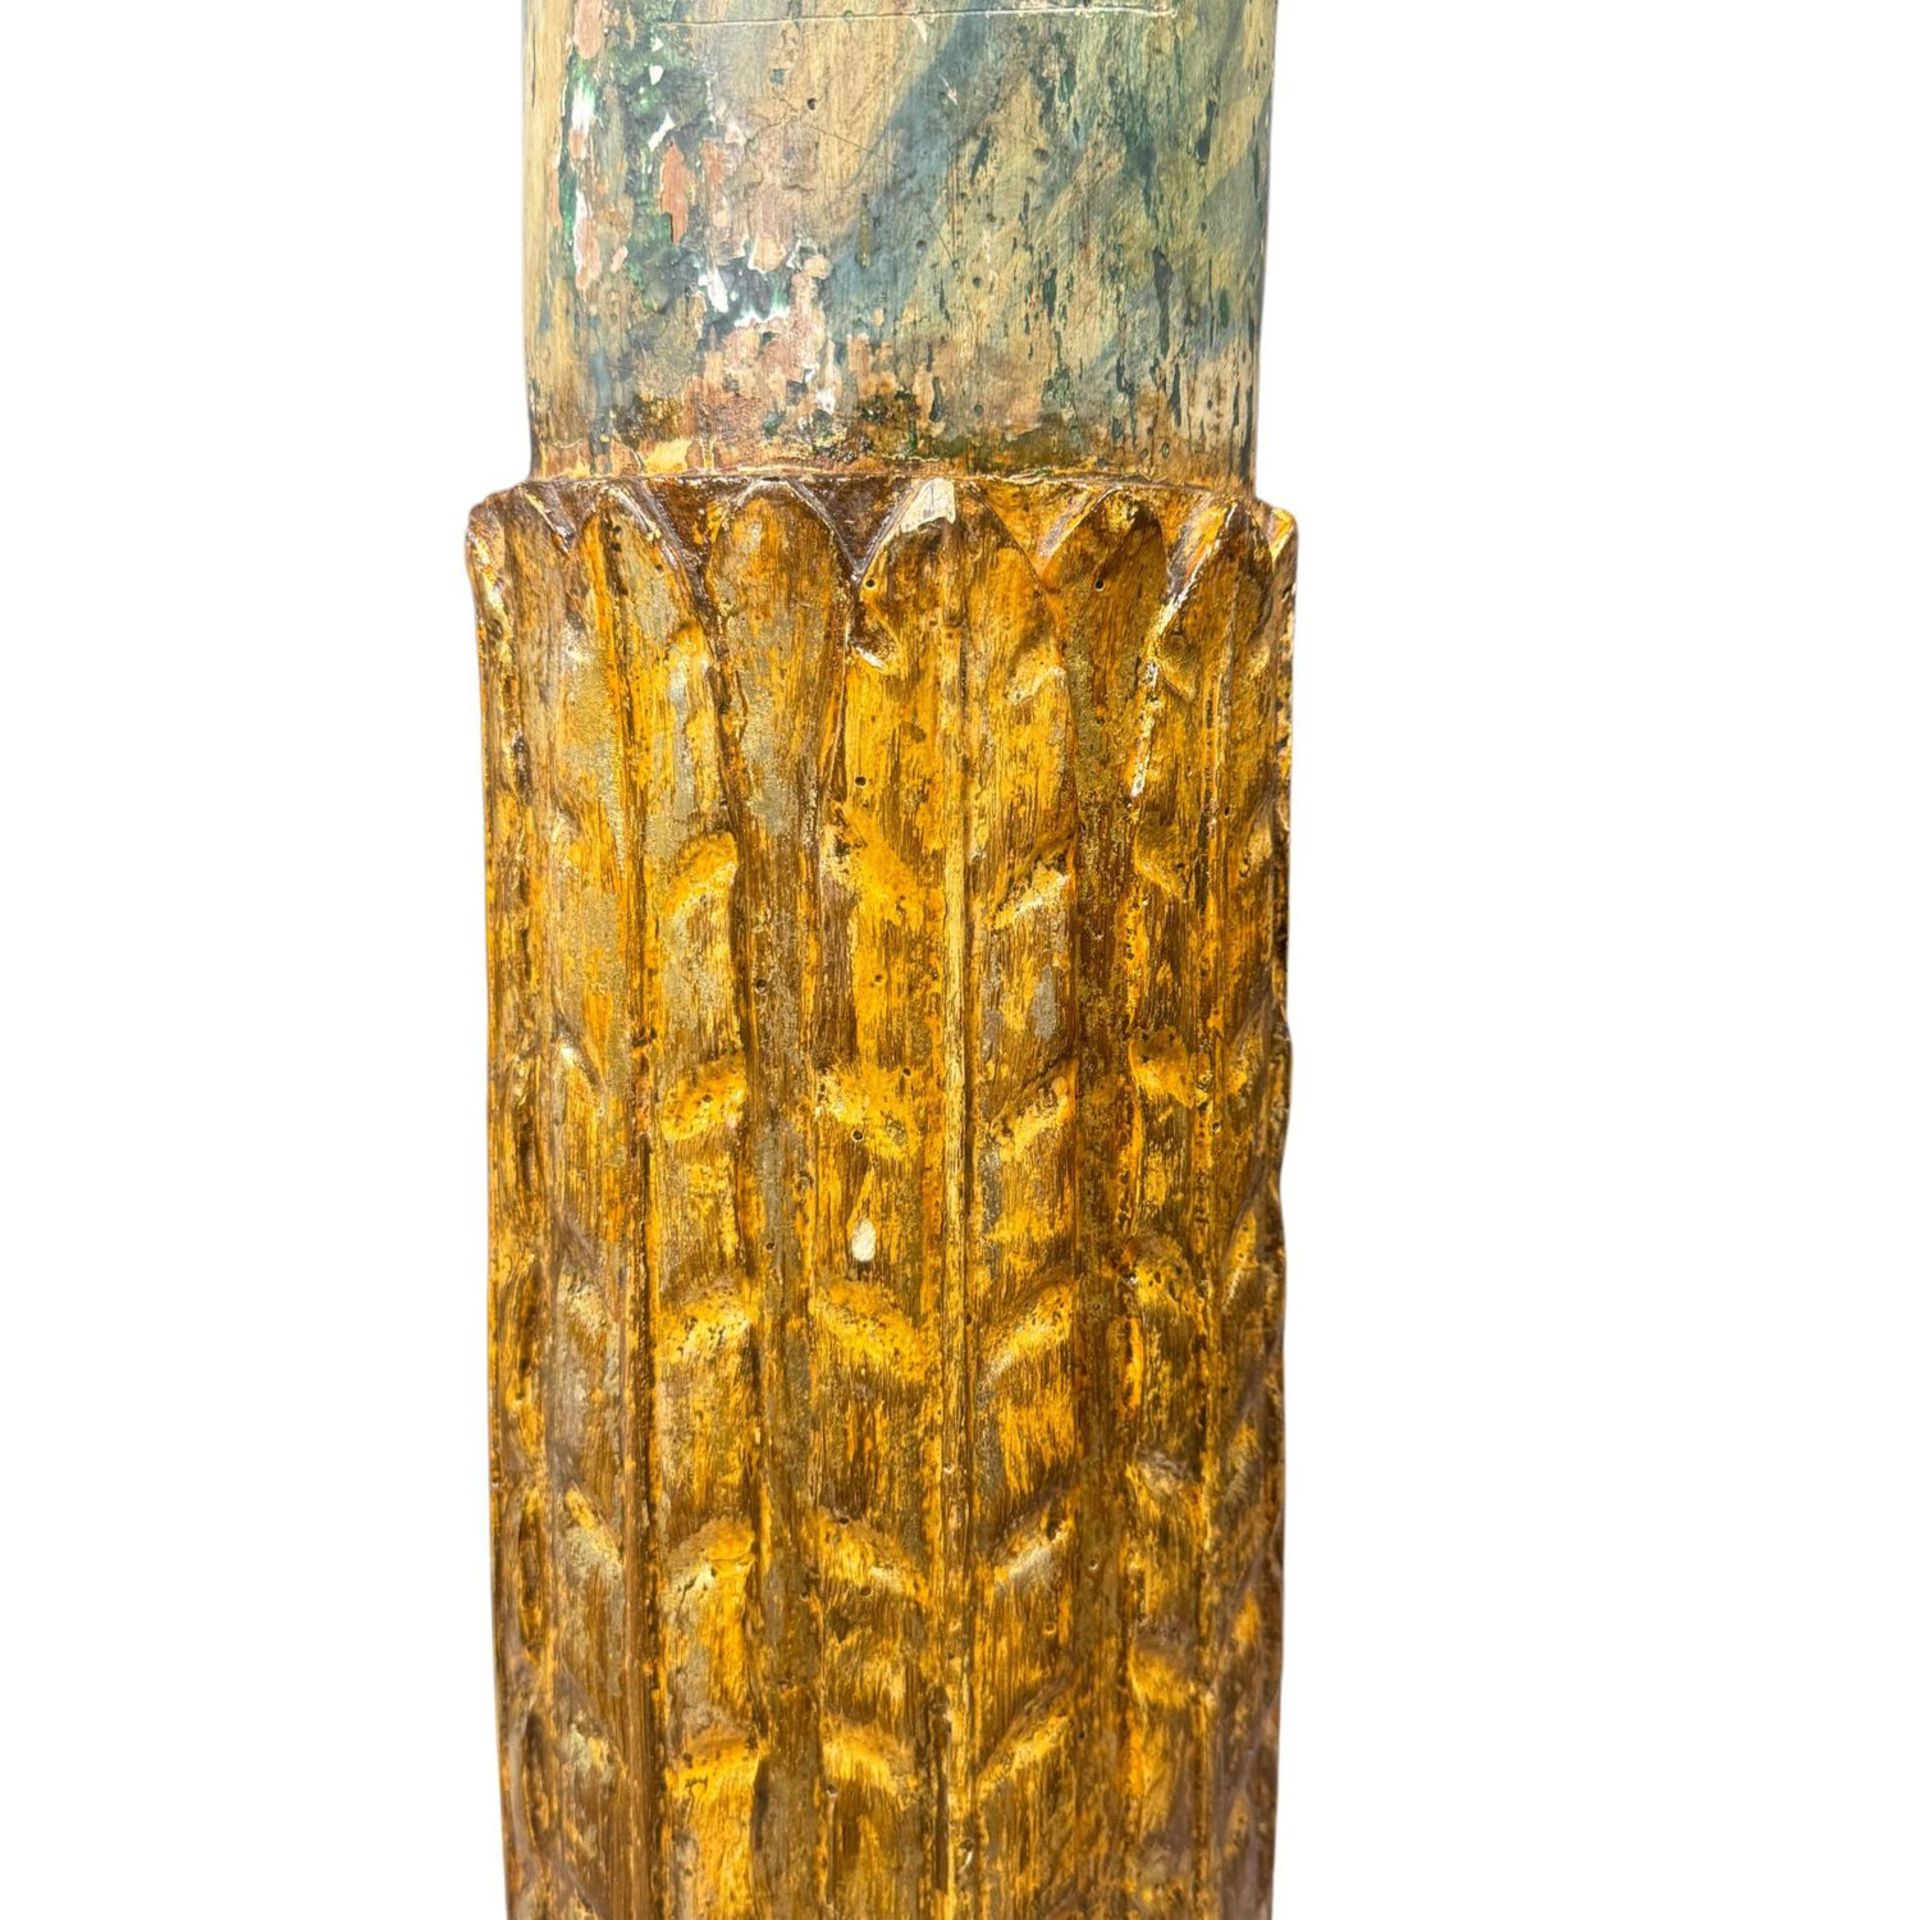 Carved wooden column with lacquer and gold finish - Image 6 of 7